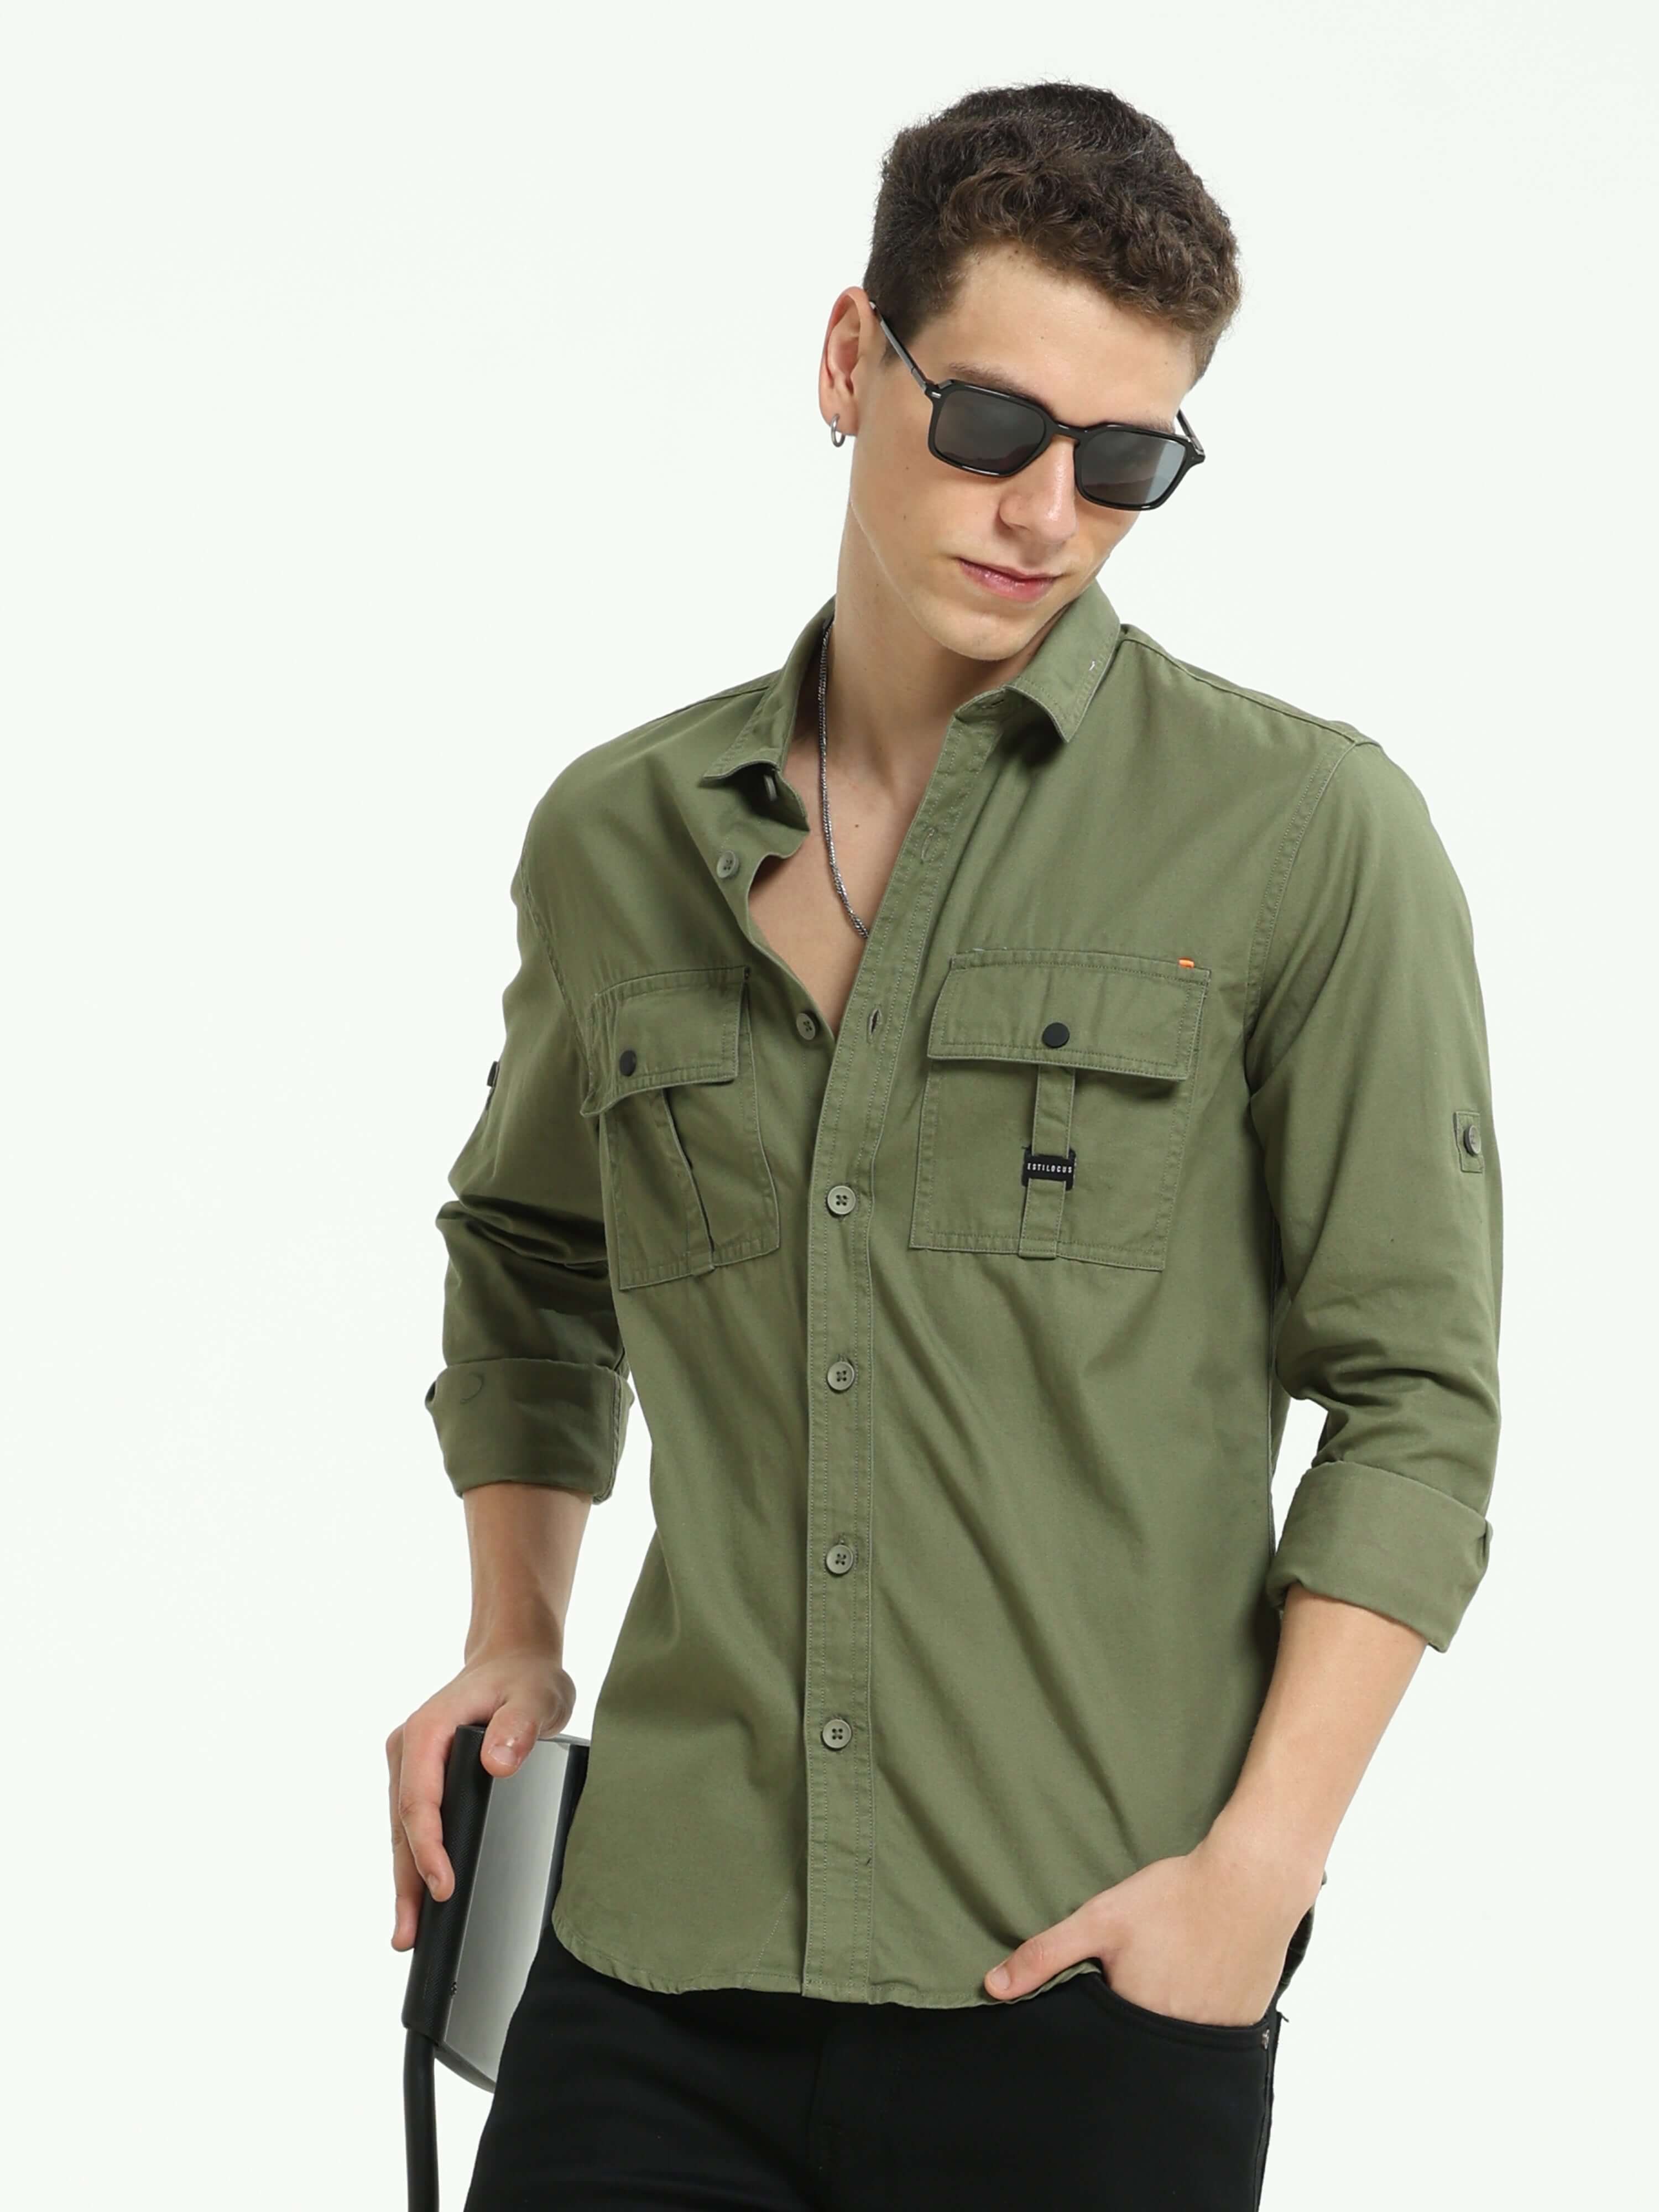 Moss green Solid double pocket shirt shop online at Estilocus. 100% Cotton • Full-sleeve solid shirt• Cut and sew placket• Regular collar• Double button edge cuff • Double pocket with flap • Curved bottom hemline• Finest printing at front placket. • All d